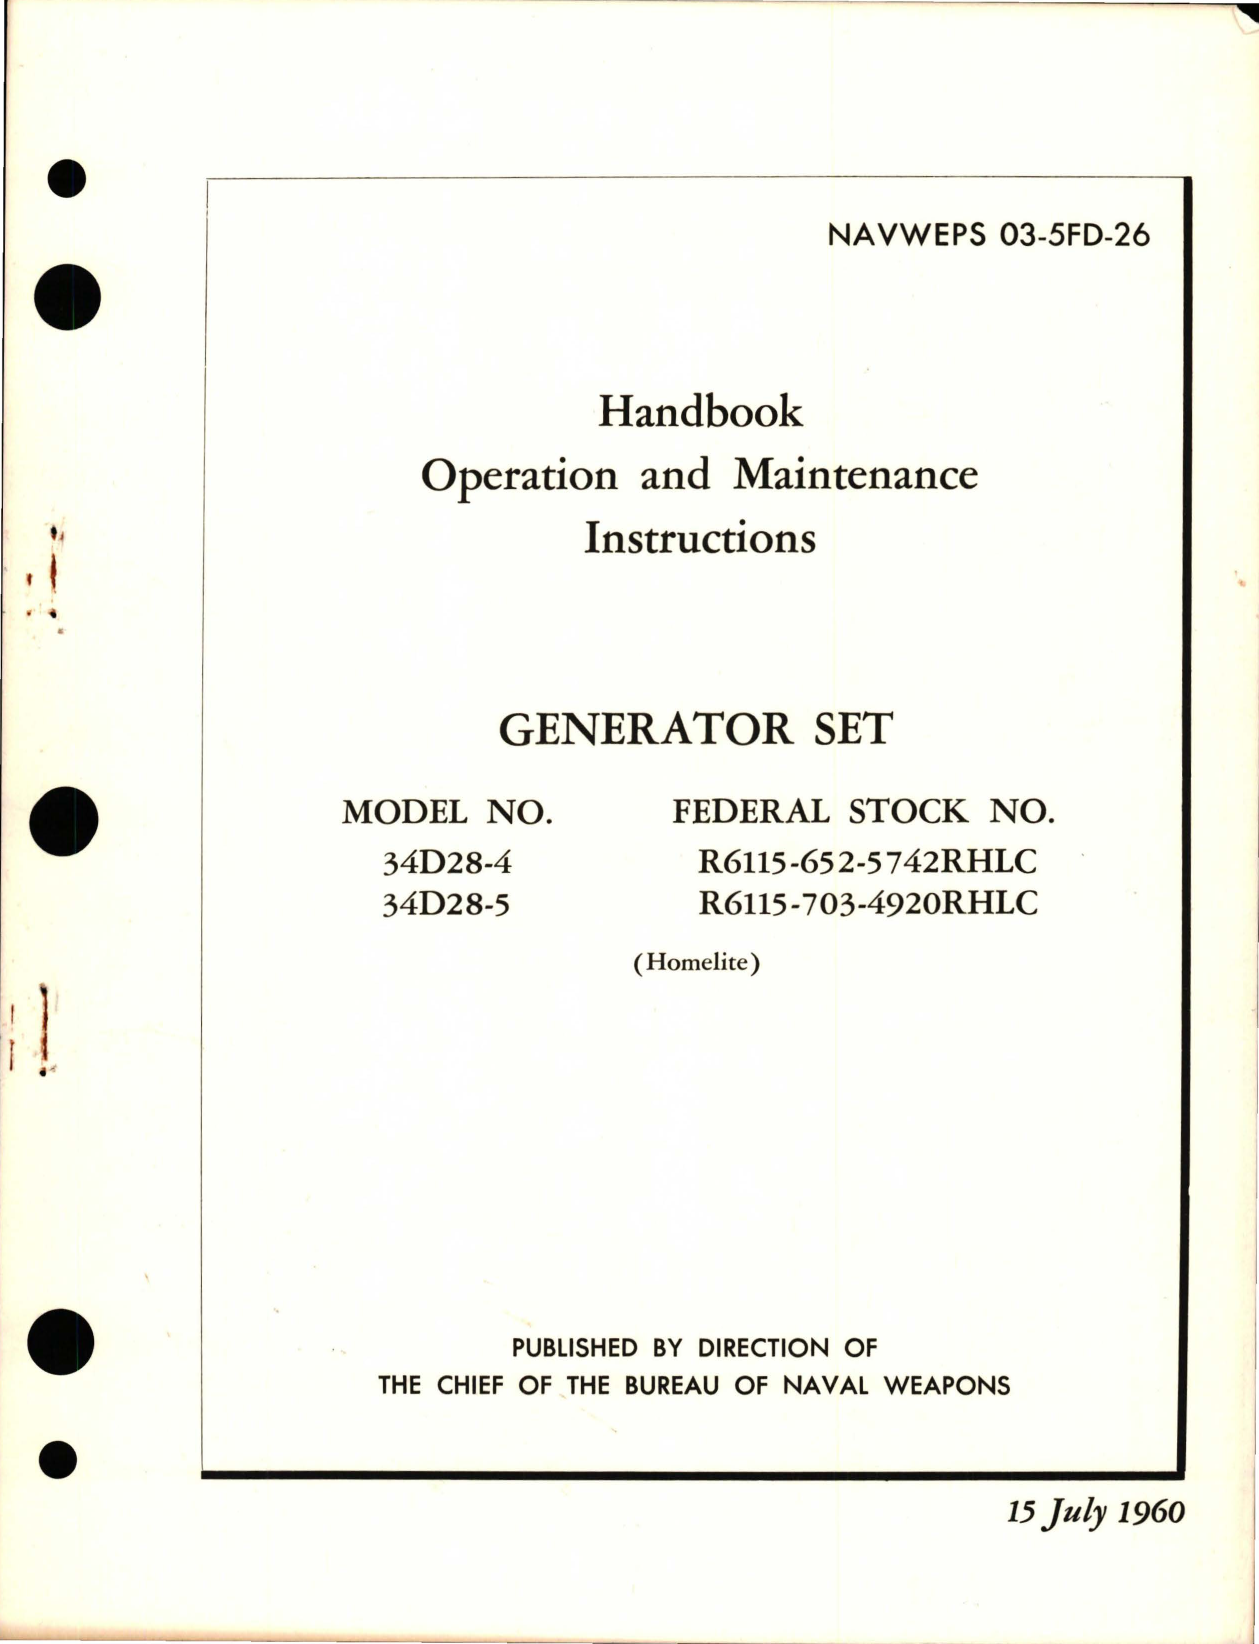 Sample page 1 from AirCorps Library document: Operation and Maintenance Instructions for Generator Set - Models 34D28-4, 34D28-5